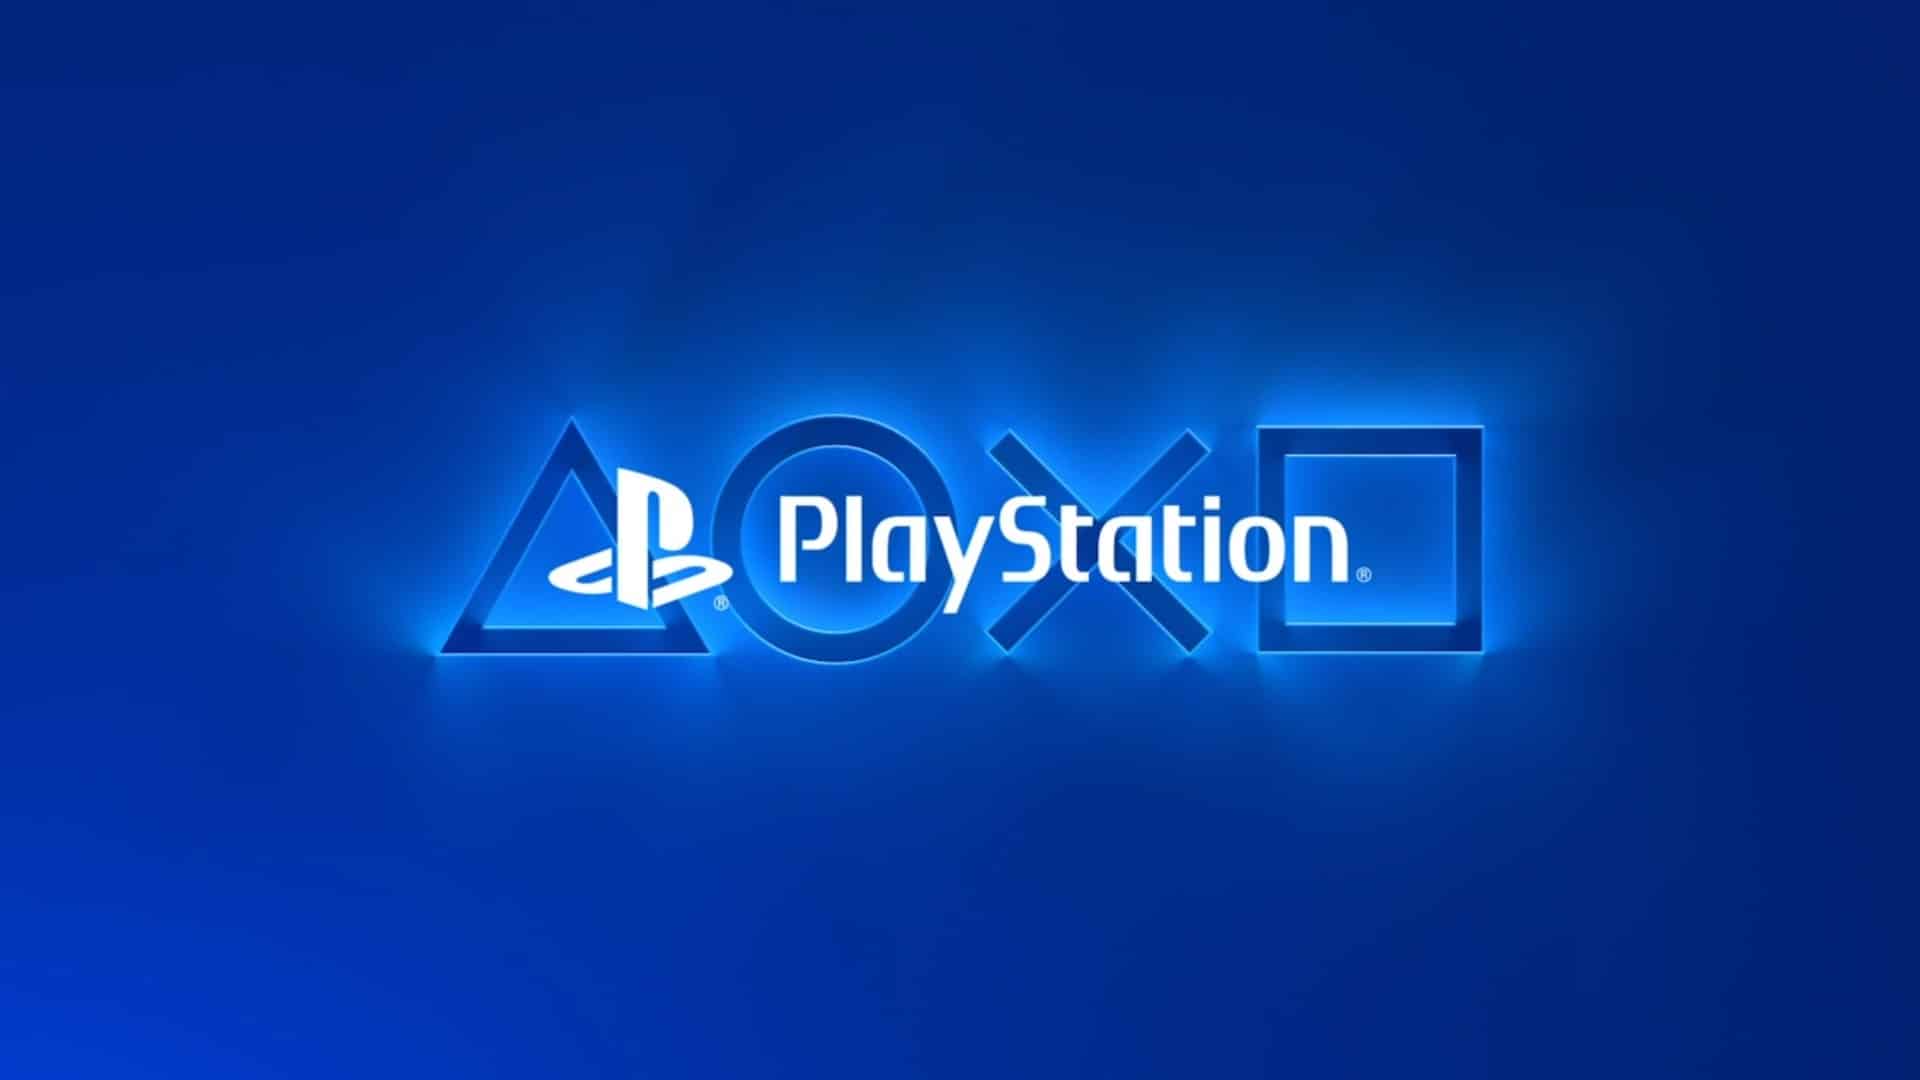 PS5 9 September Event Includes Price, Release Date, UI and Unboxing – Rumour